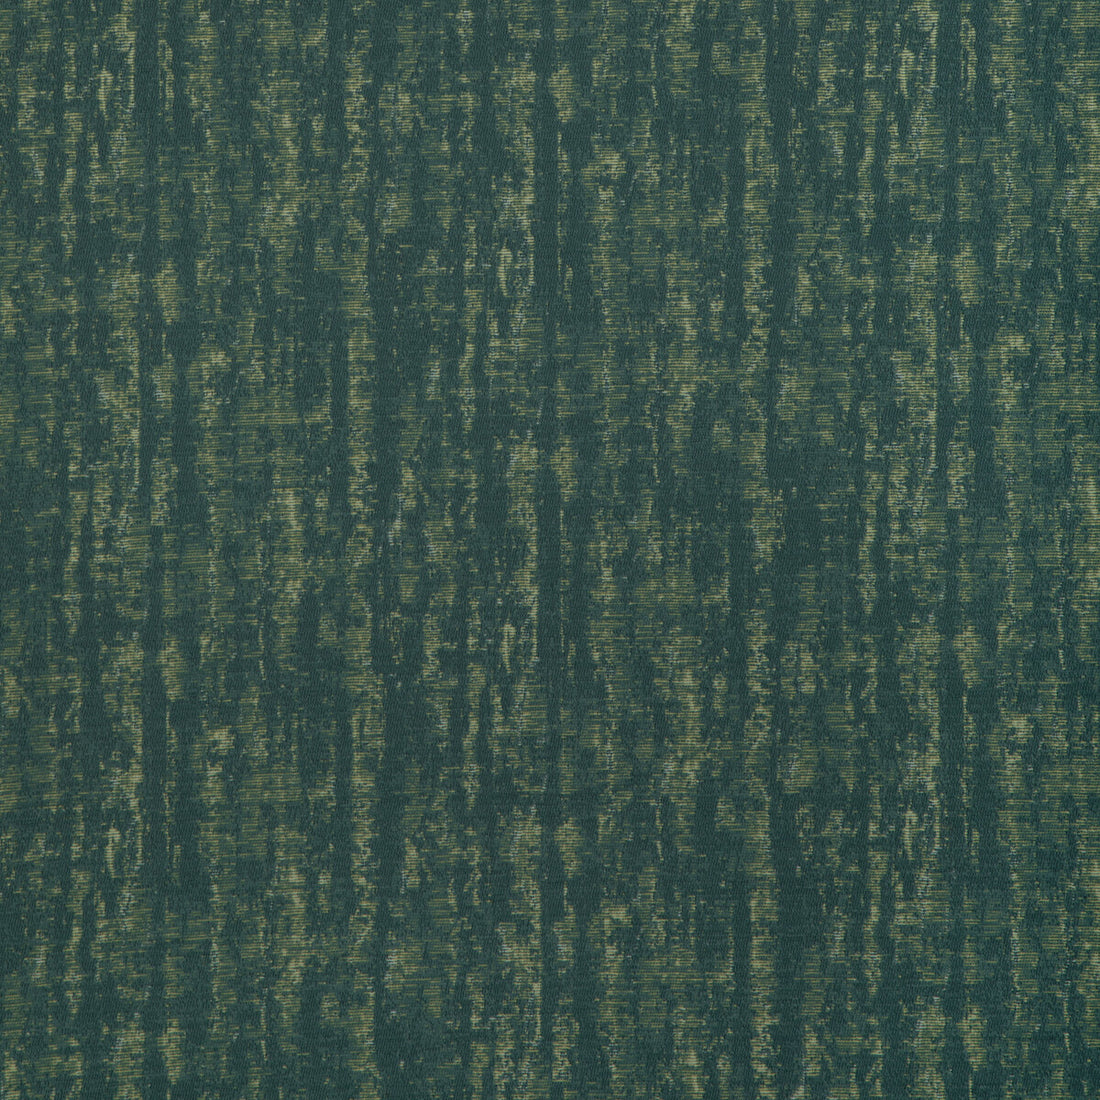 Mossi fabric in lagoon color - pattern 37071.353.0 - by Kravet Contract in the Chesapeake collection